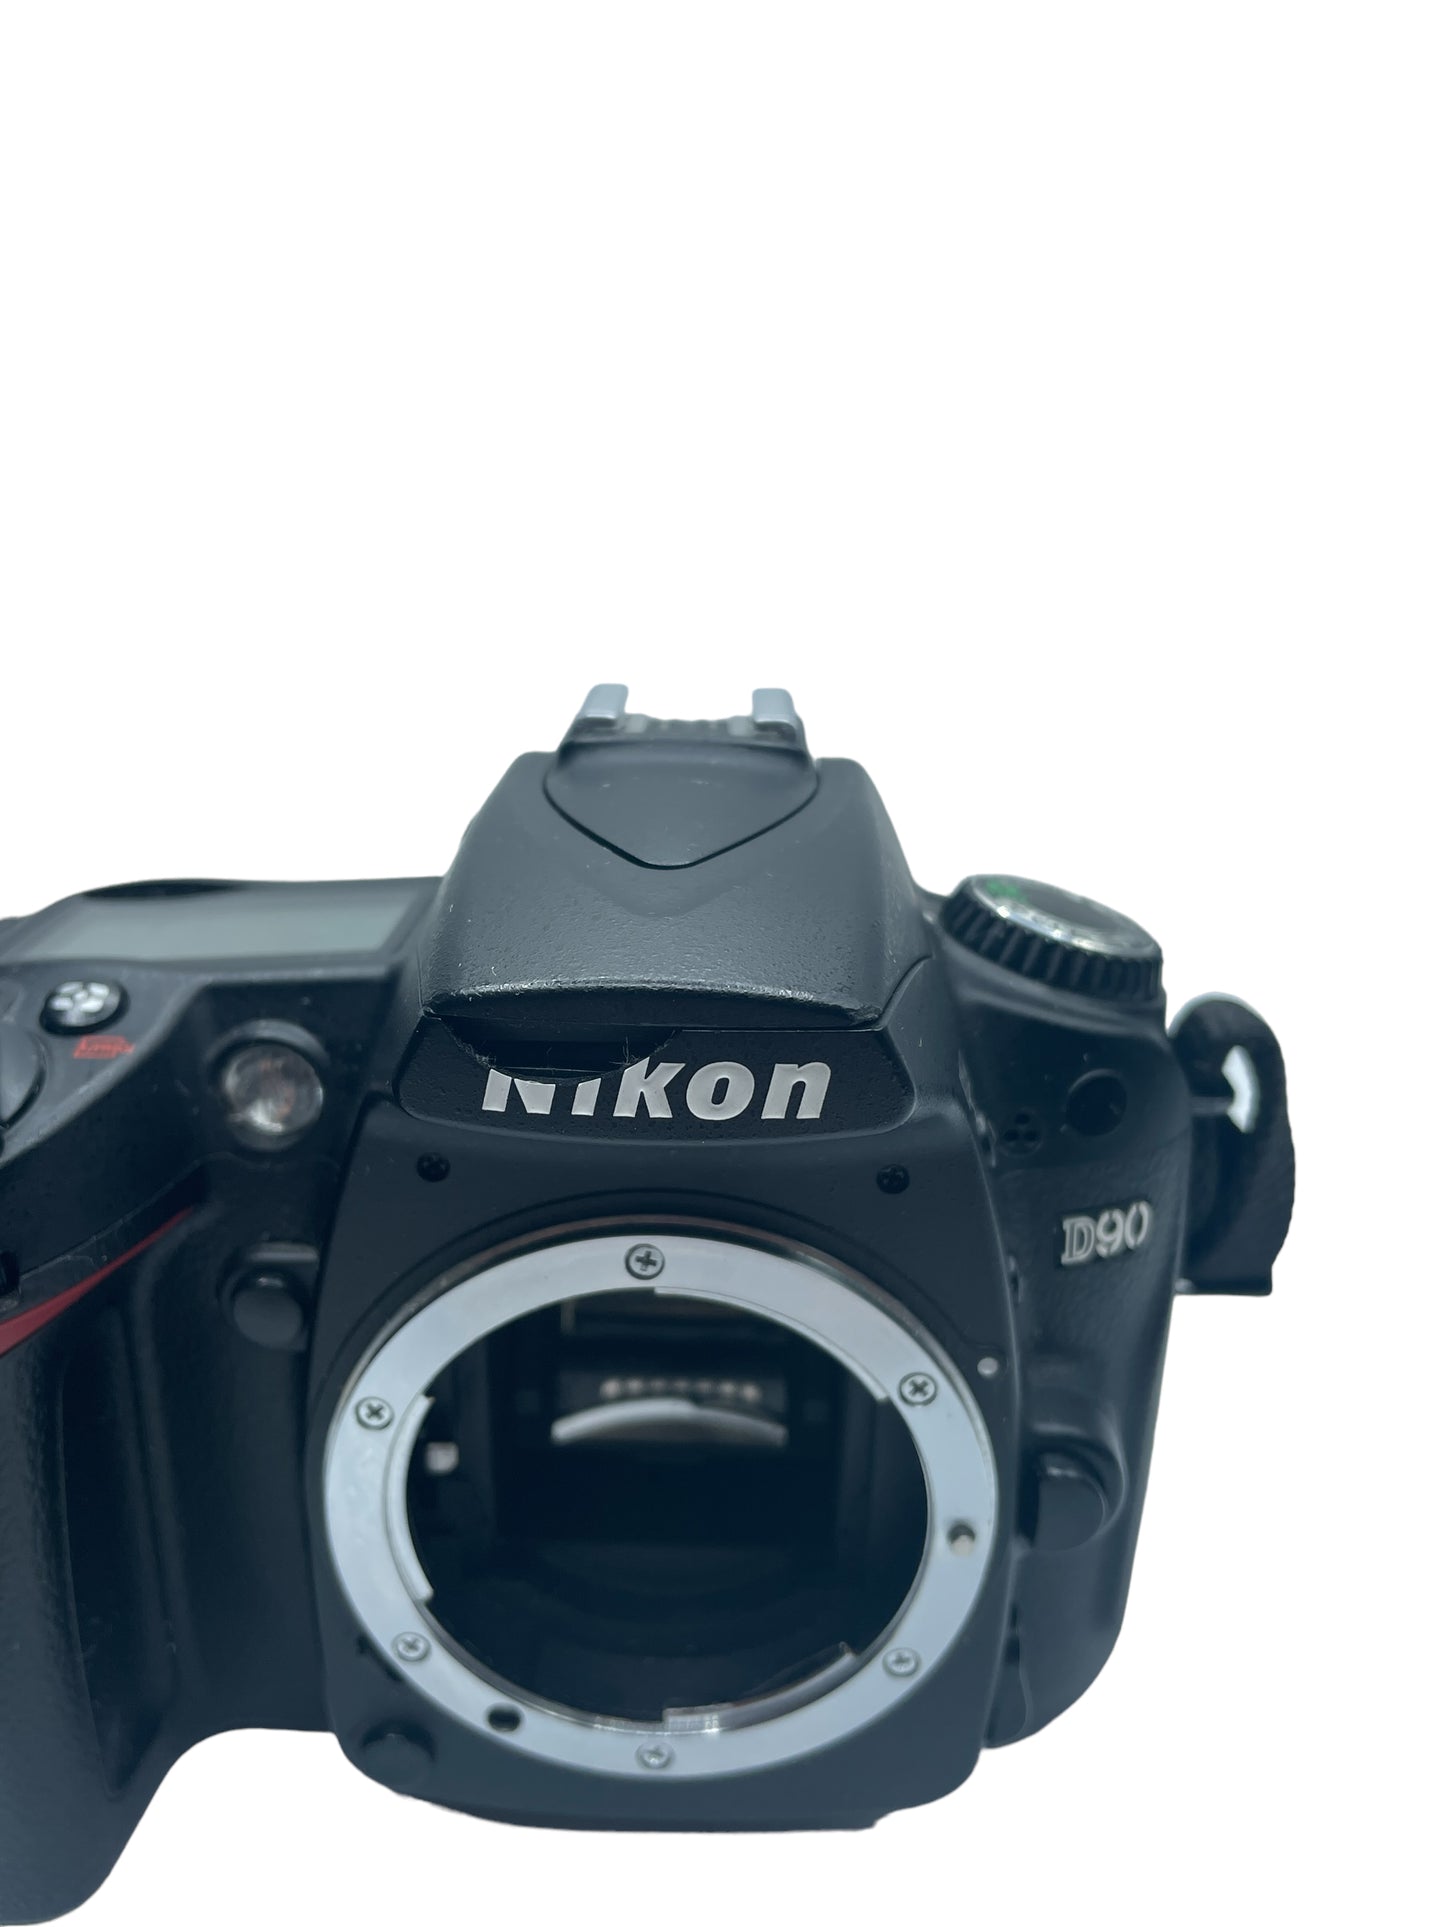 Nikon D90 Camera Body with an Aftermarket Charger